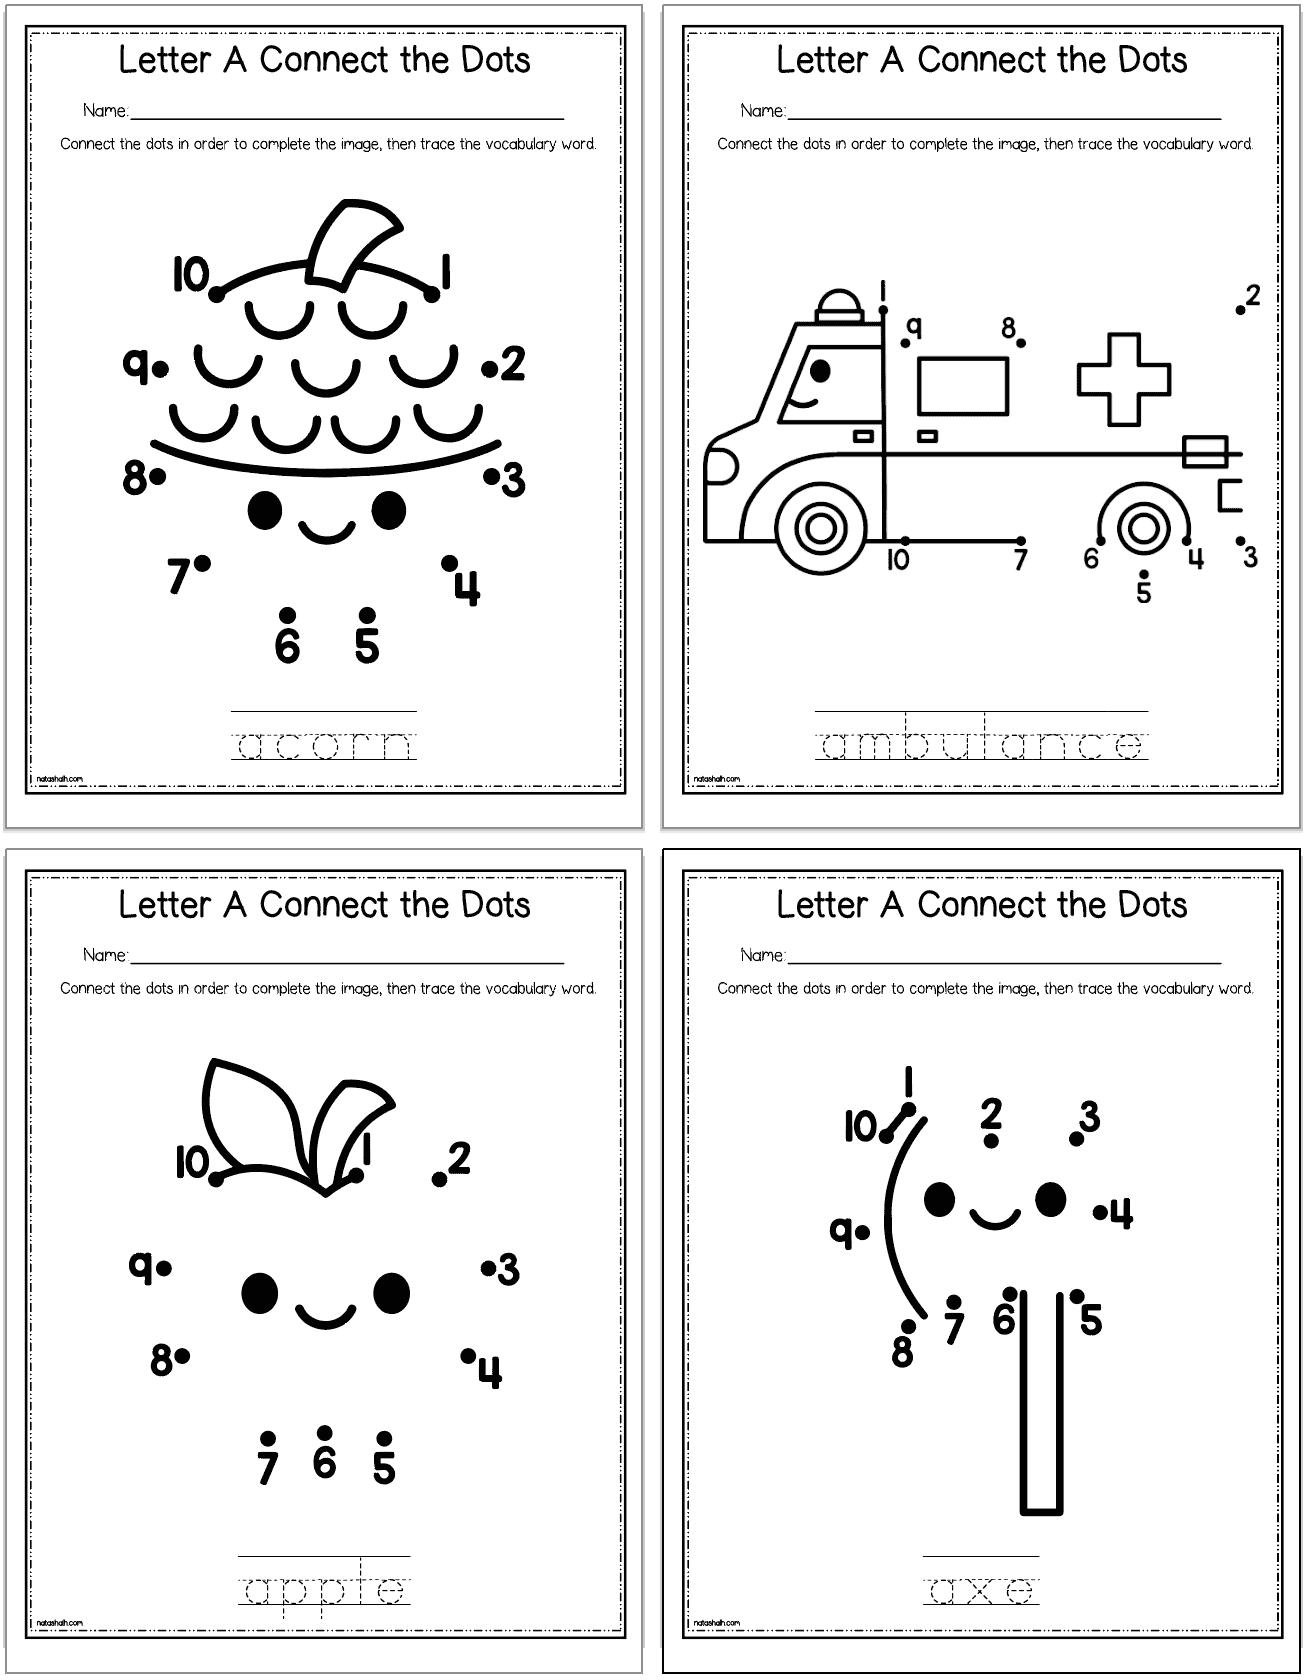 A preview of four connect the dots worksheets with numbers 1-10. Each page shows a picture of something starting with the letter a.